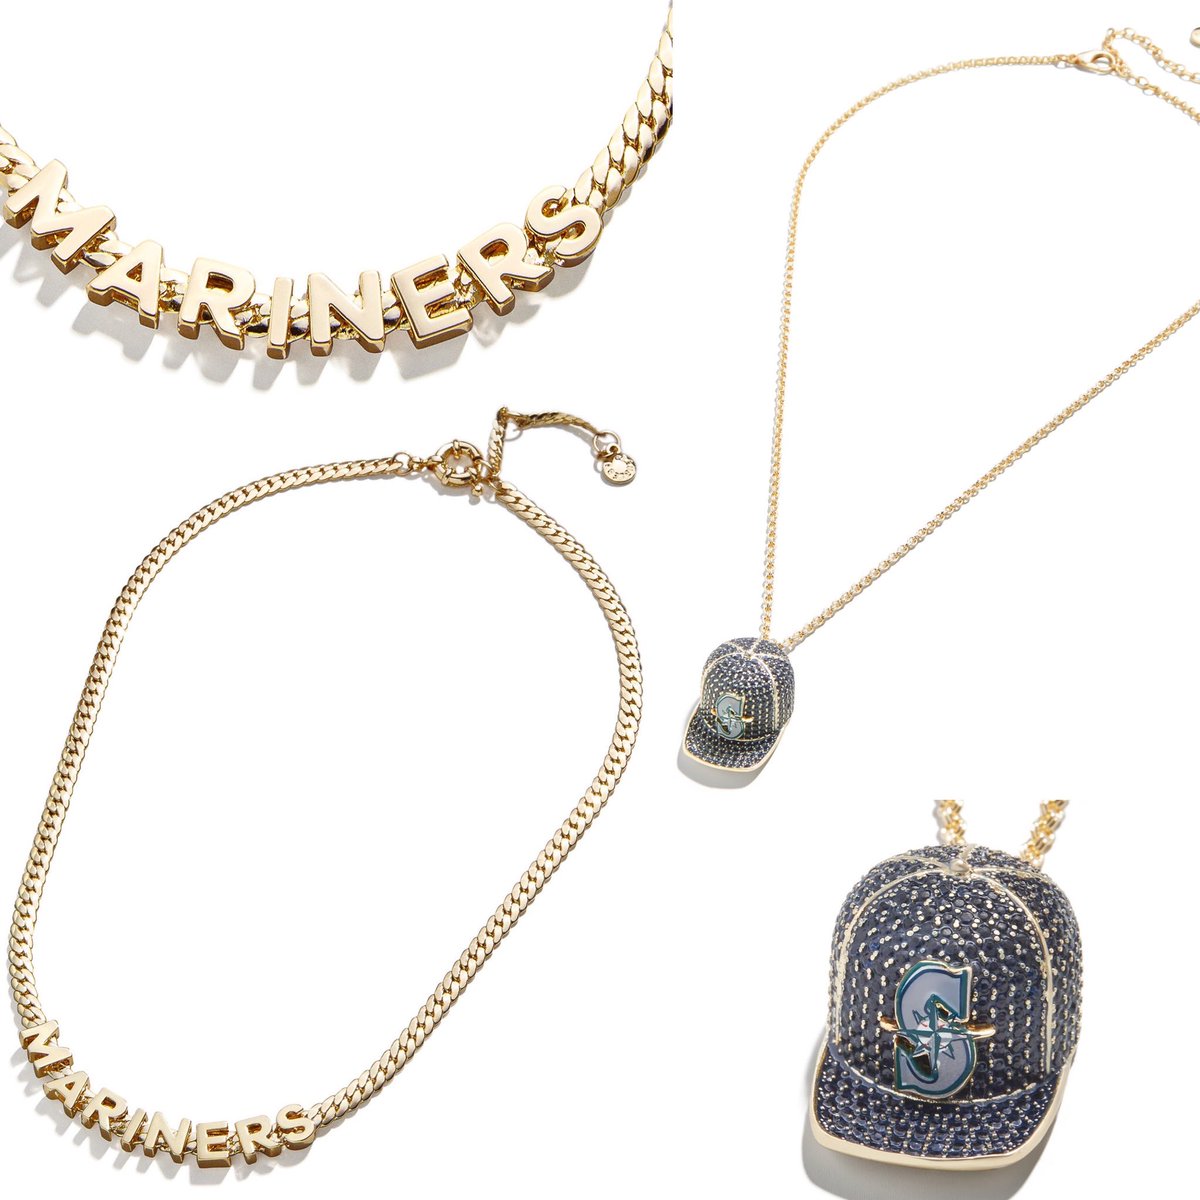 More Mother’s Day gift ideas coming your way! Check out these amazing Mariners jewelry styles by @BaubleBar! 🤩 Can’t make it to a store? Call us at 206.346.4287 during non game day hours to place a phone order.